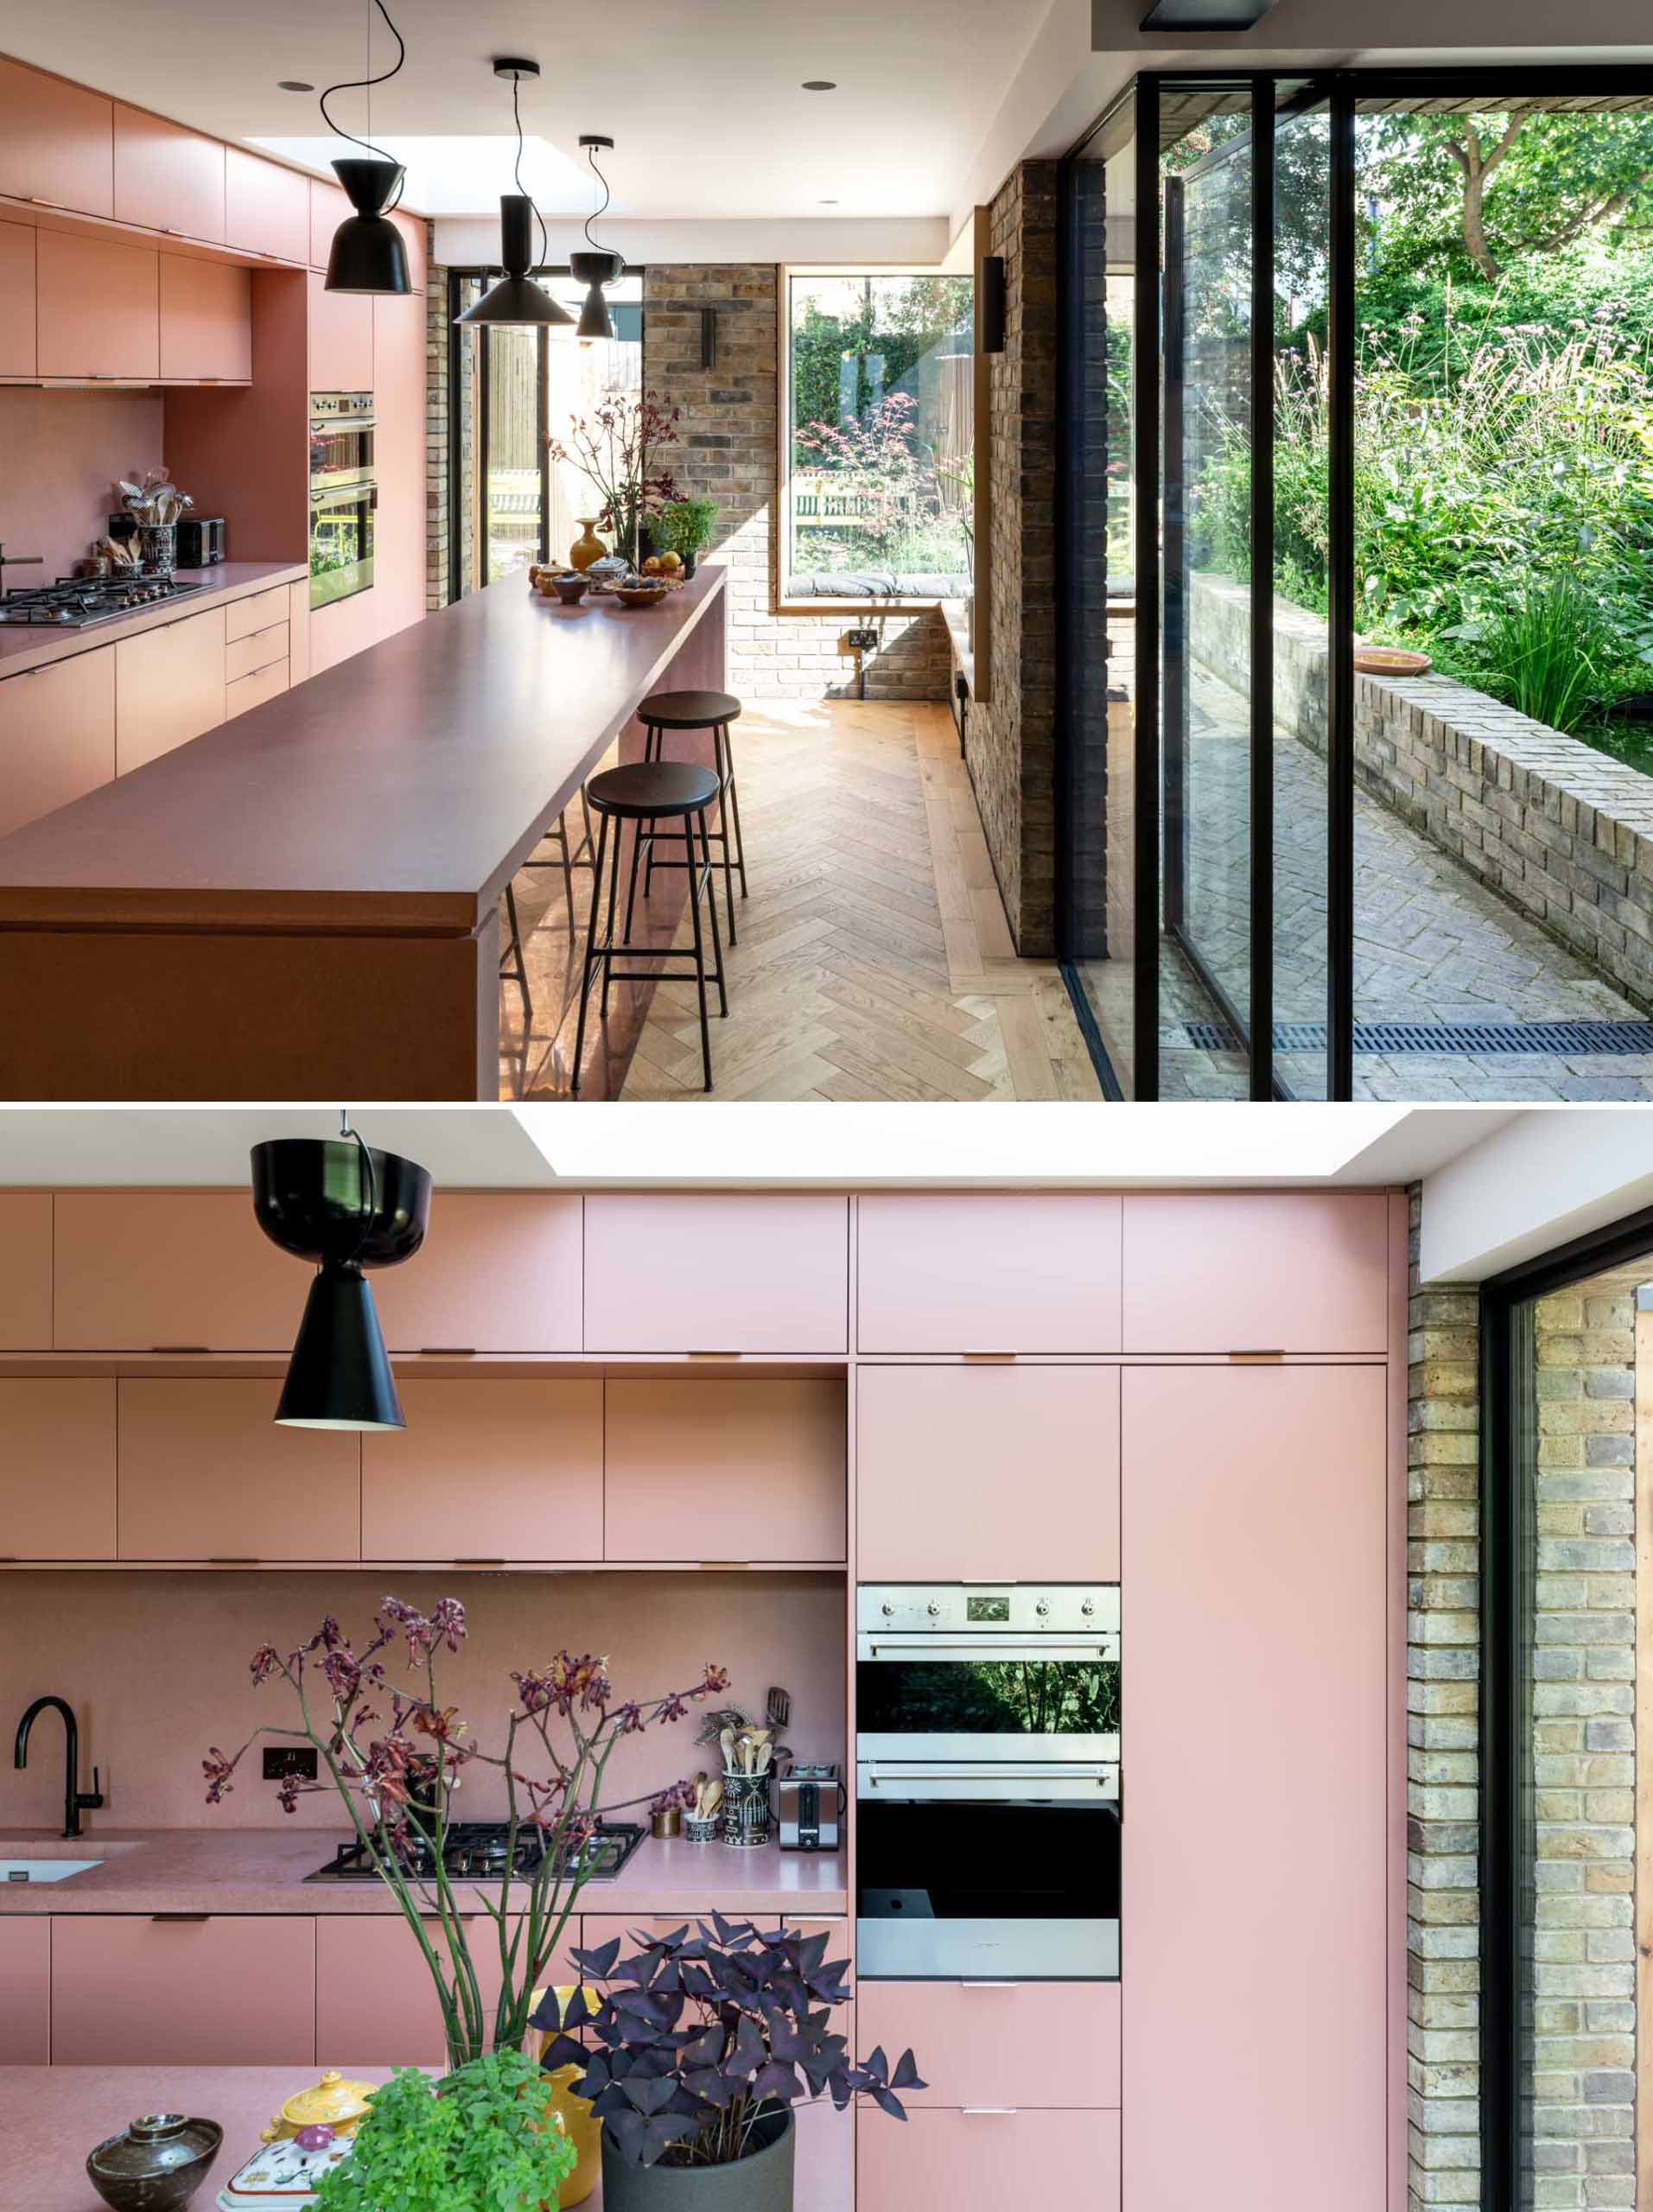 A brick home extension with a blush pink kitchen and window seats.